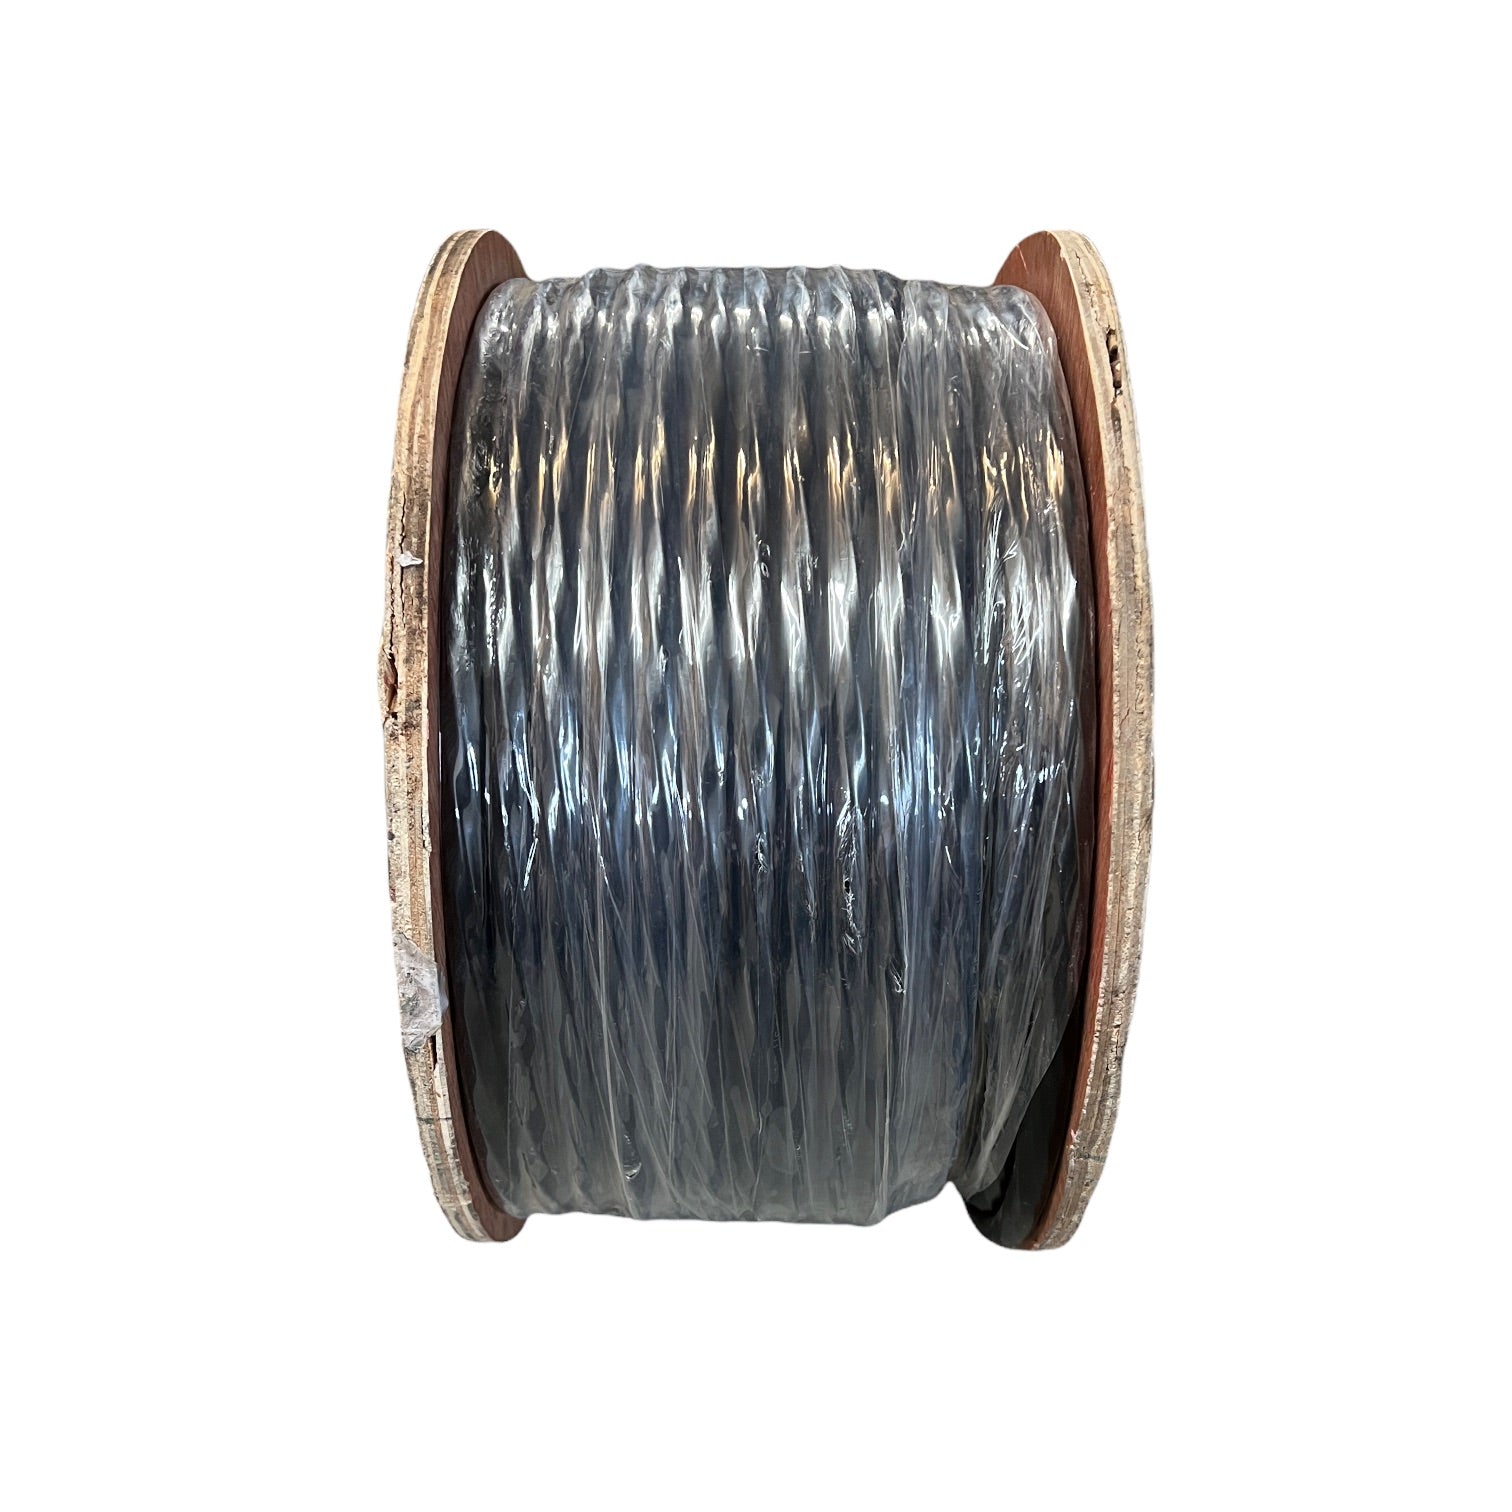 18/6X500 - Multi-Conductor Irrigation Control Wire, 18 awg, 18/6 X 500 ft